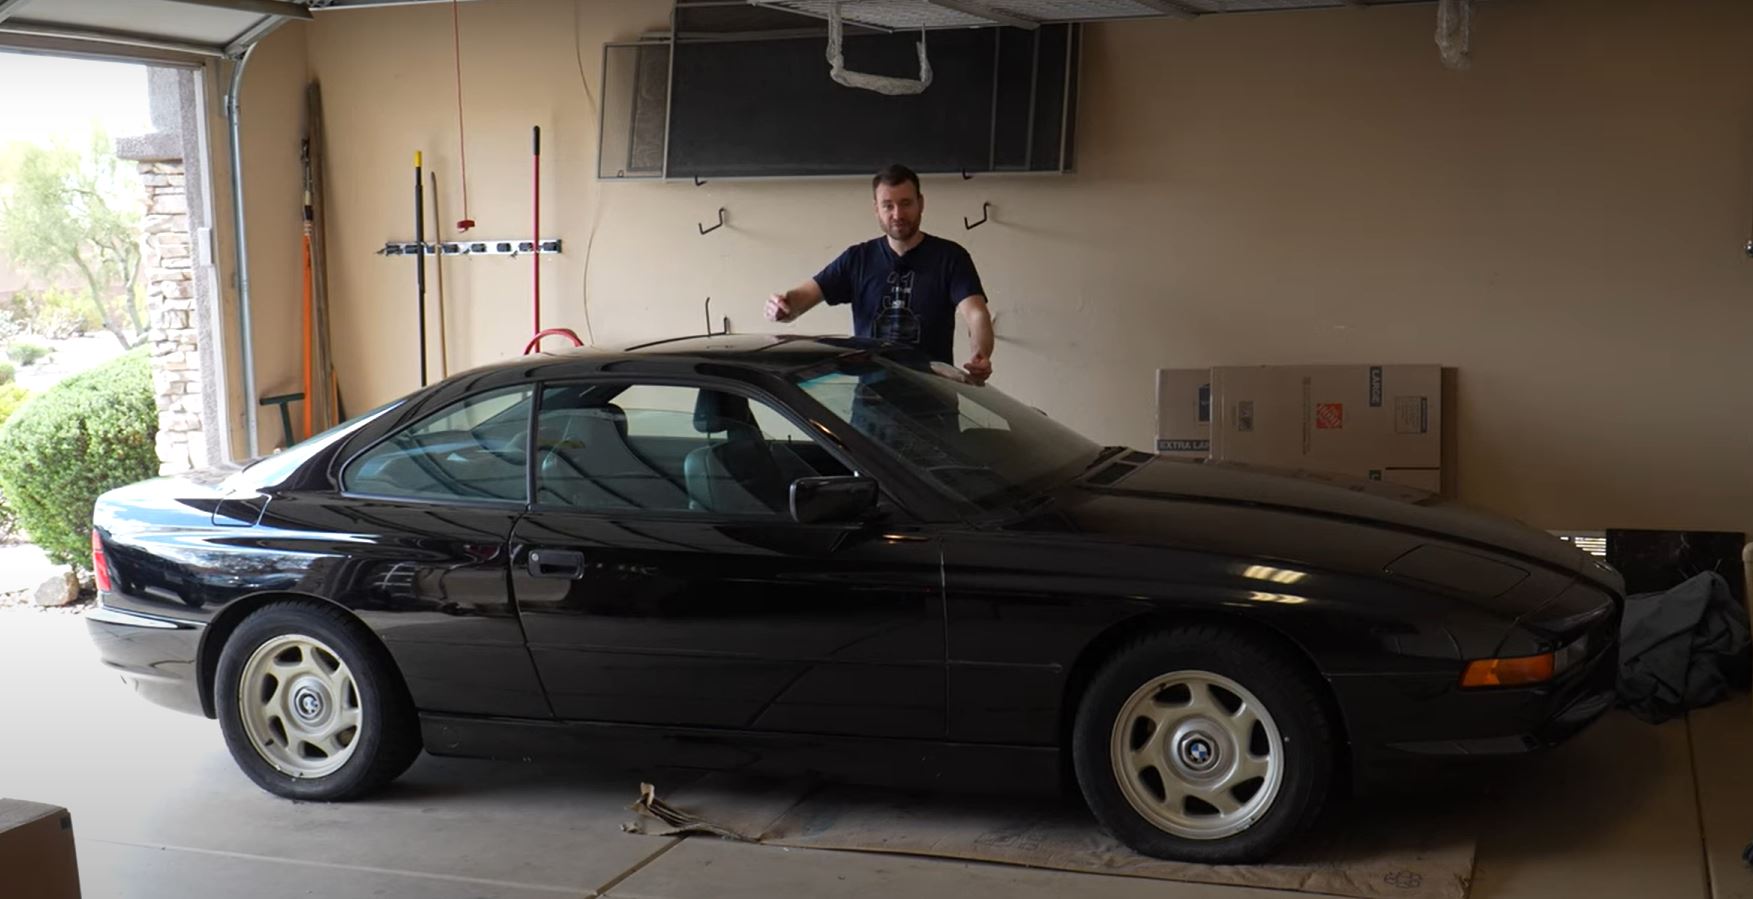 Car enthusiast Sreten set himself the challenge of restoring the V12 BMW E31 850 in just two days